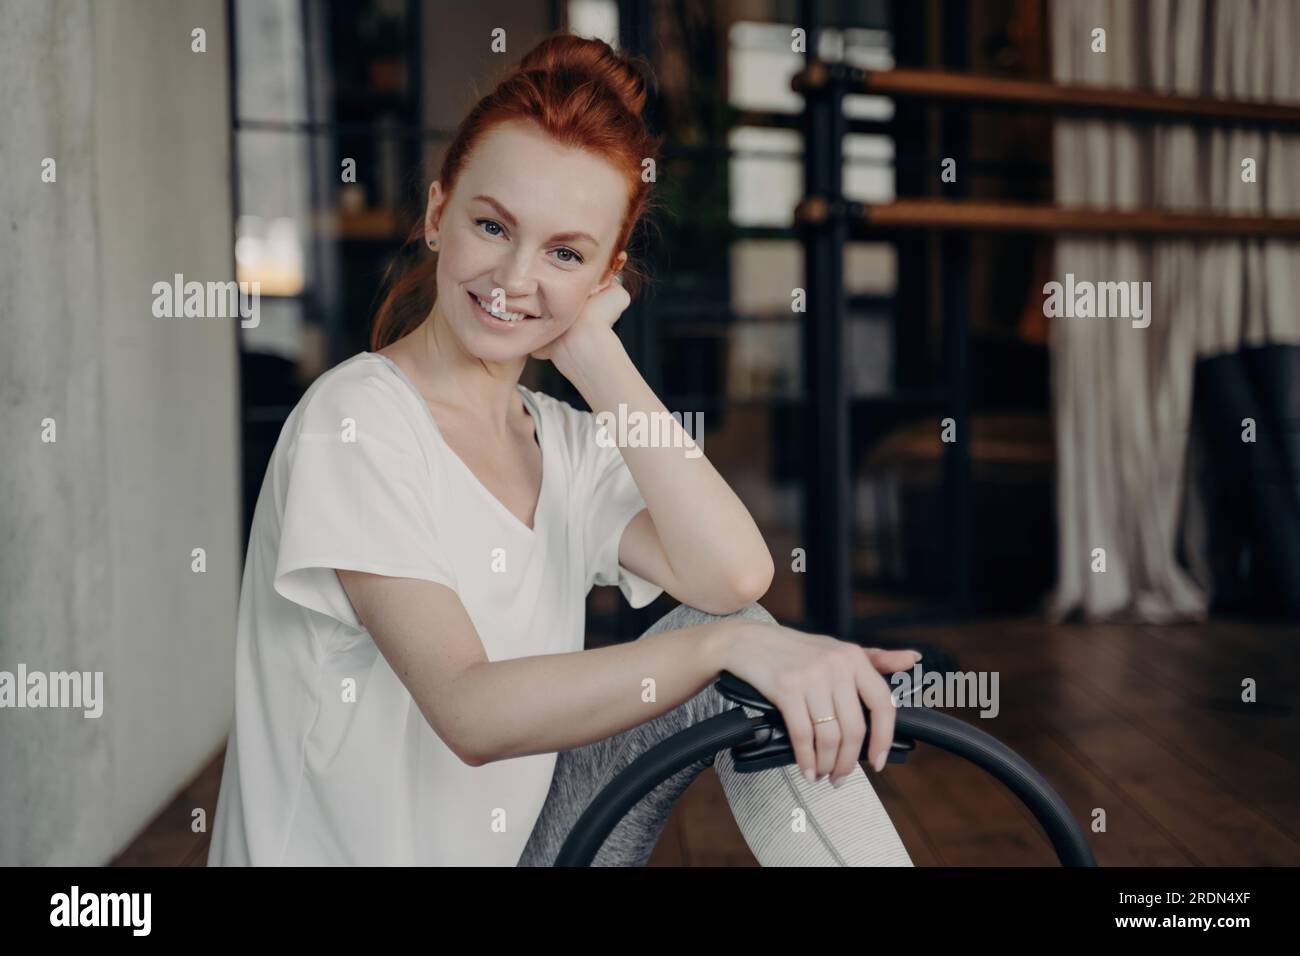 Gorgeous ginger female fitness instructor in white t-shirt smiles at camera during Pilates ring workout in gym. Promoting a healthy, active lifestyle. Stock Photo